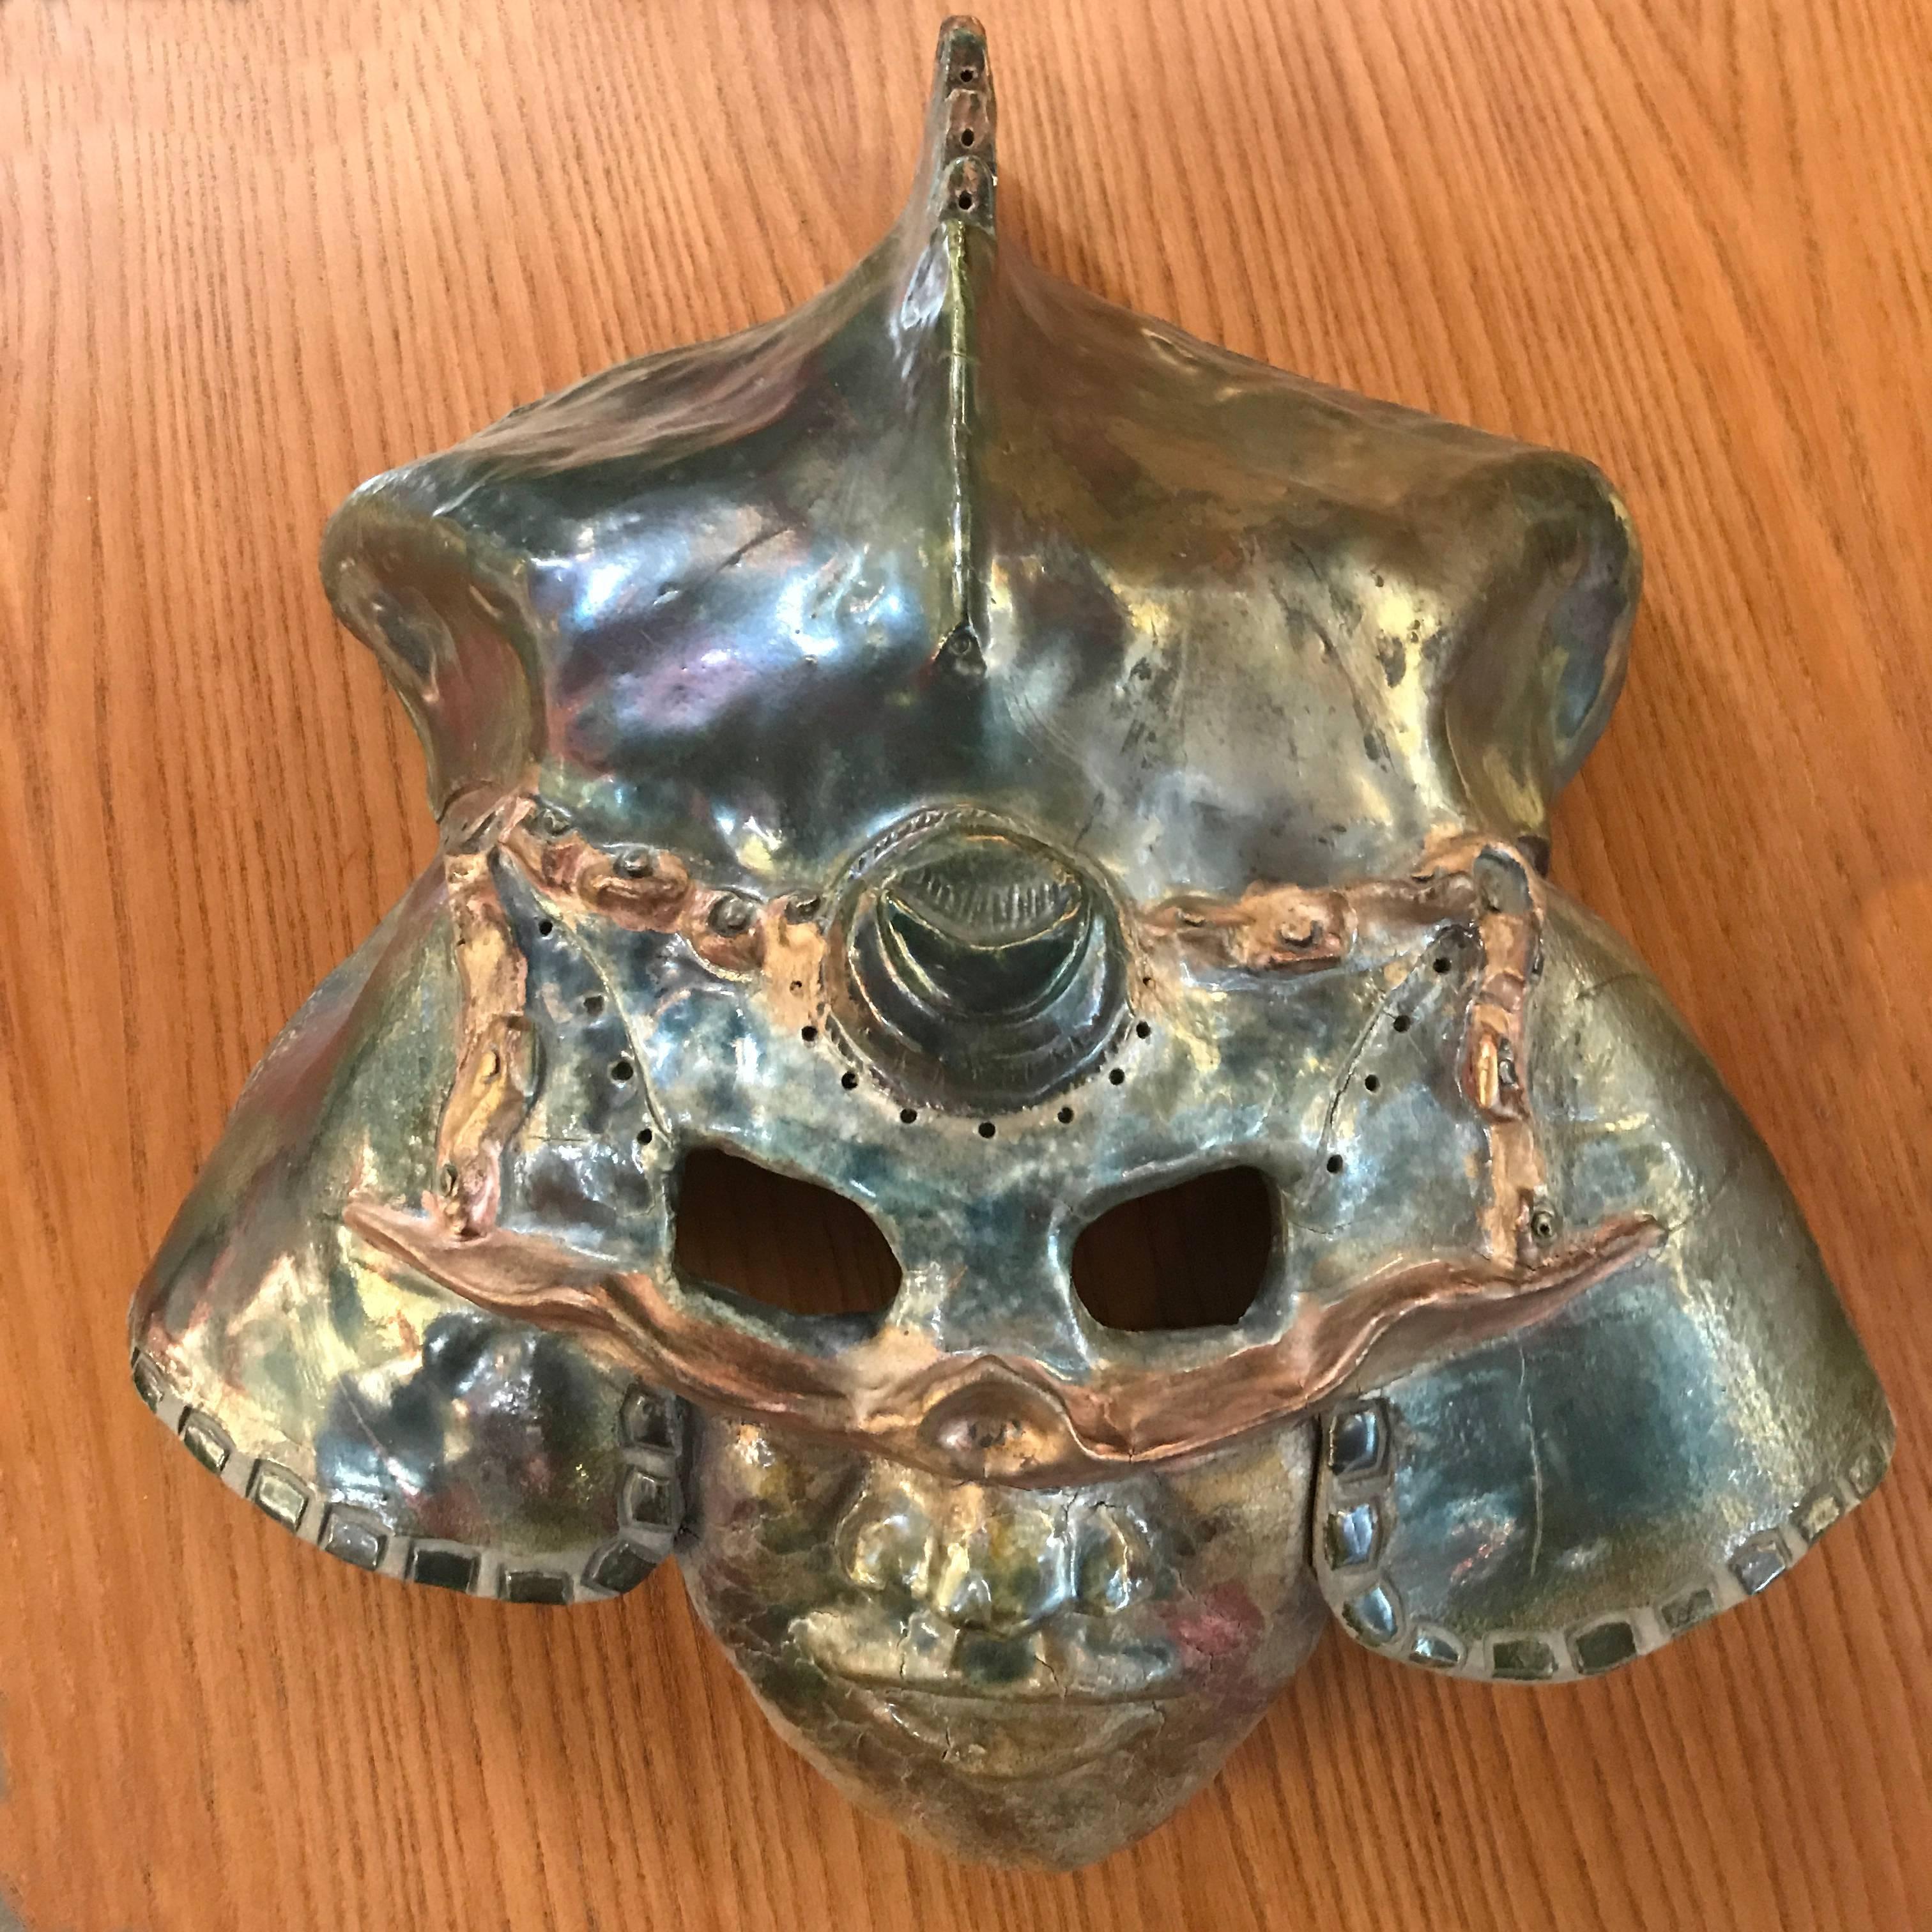 Raku style ceramic mask wall art of a warrior in a helmet.

Rakuware is Japanese hand-modelled pottery that is fired at a low temperature and rapidly cooled and typically used to make tea bowls. The technique became popular among American potters